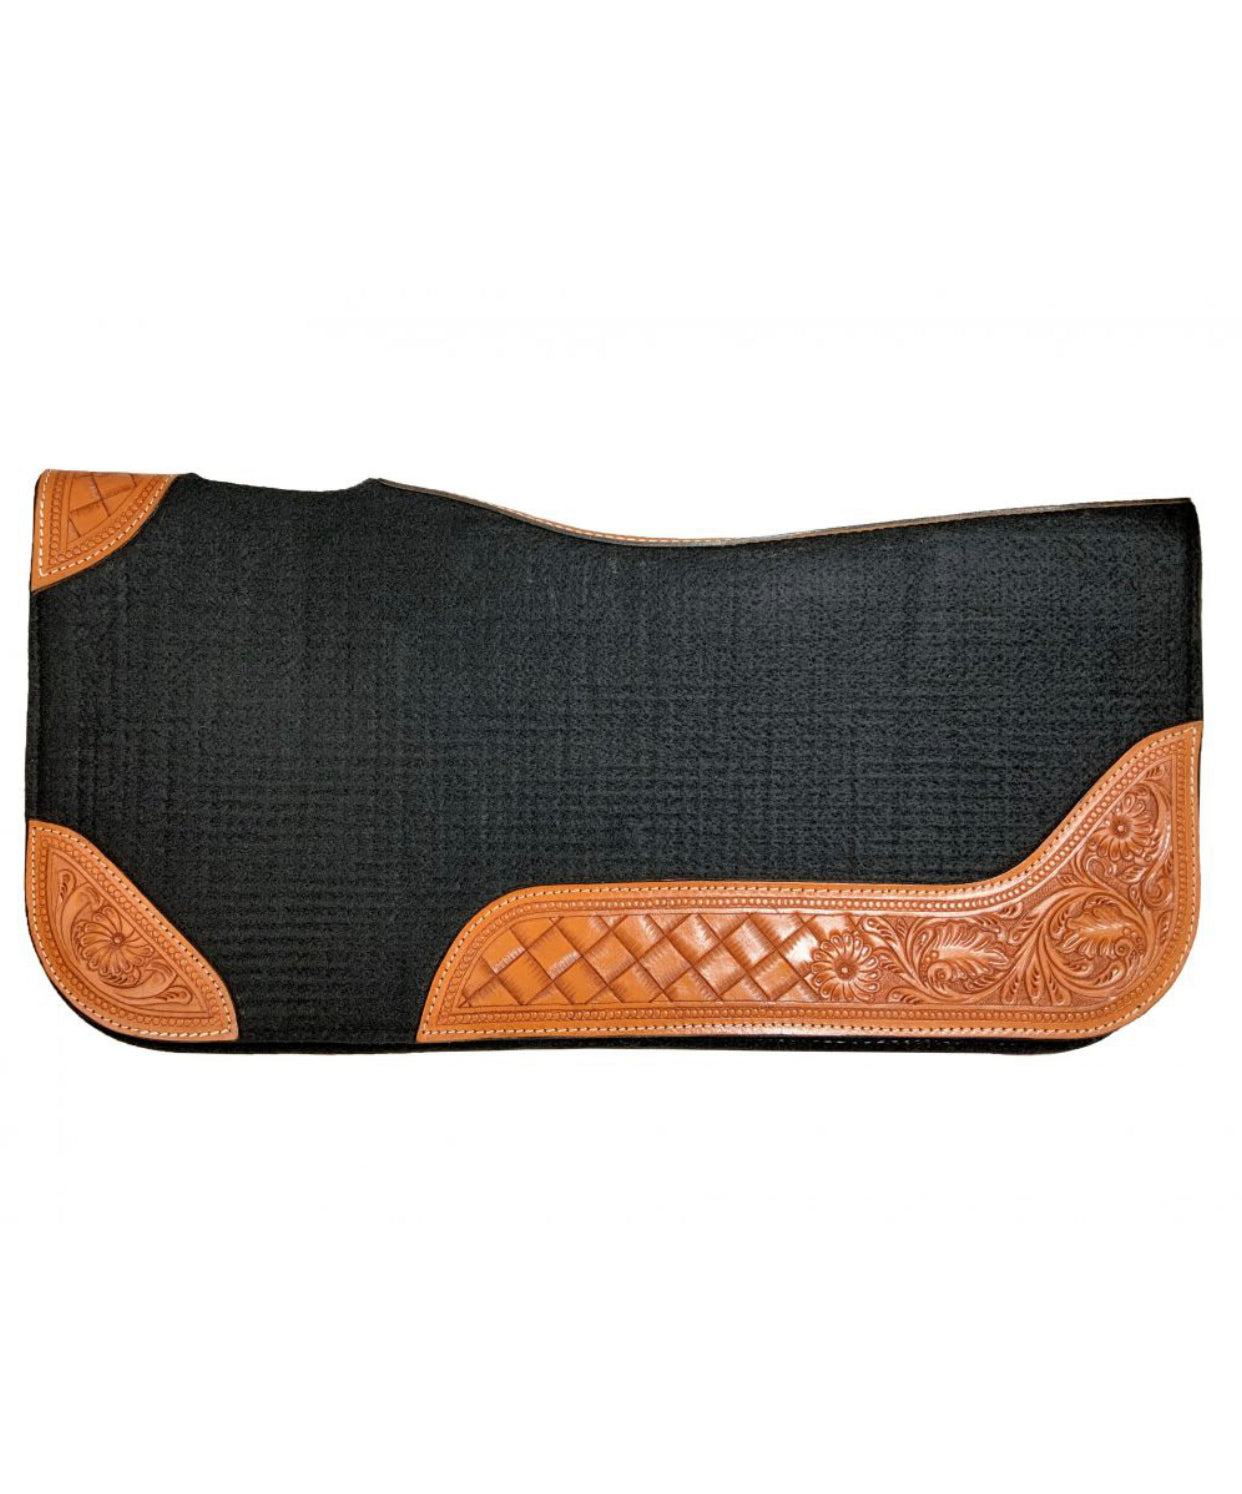 4936 - 3/4” Heavy Duty Black felt pad with floral tooling